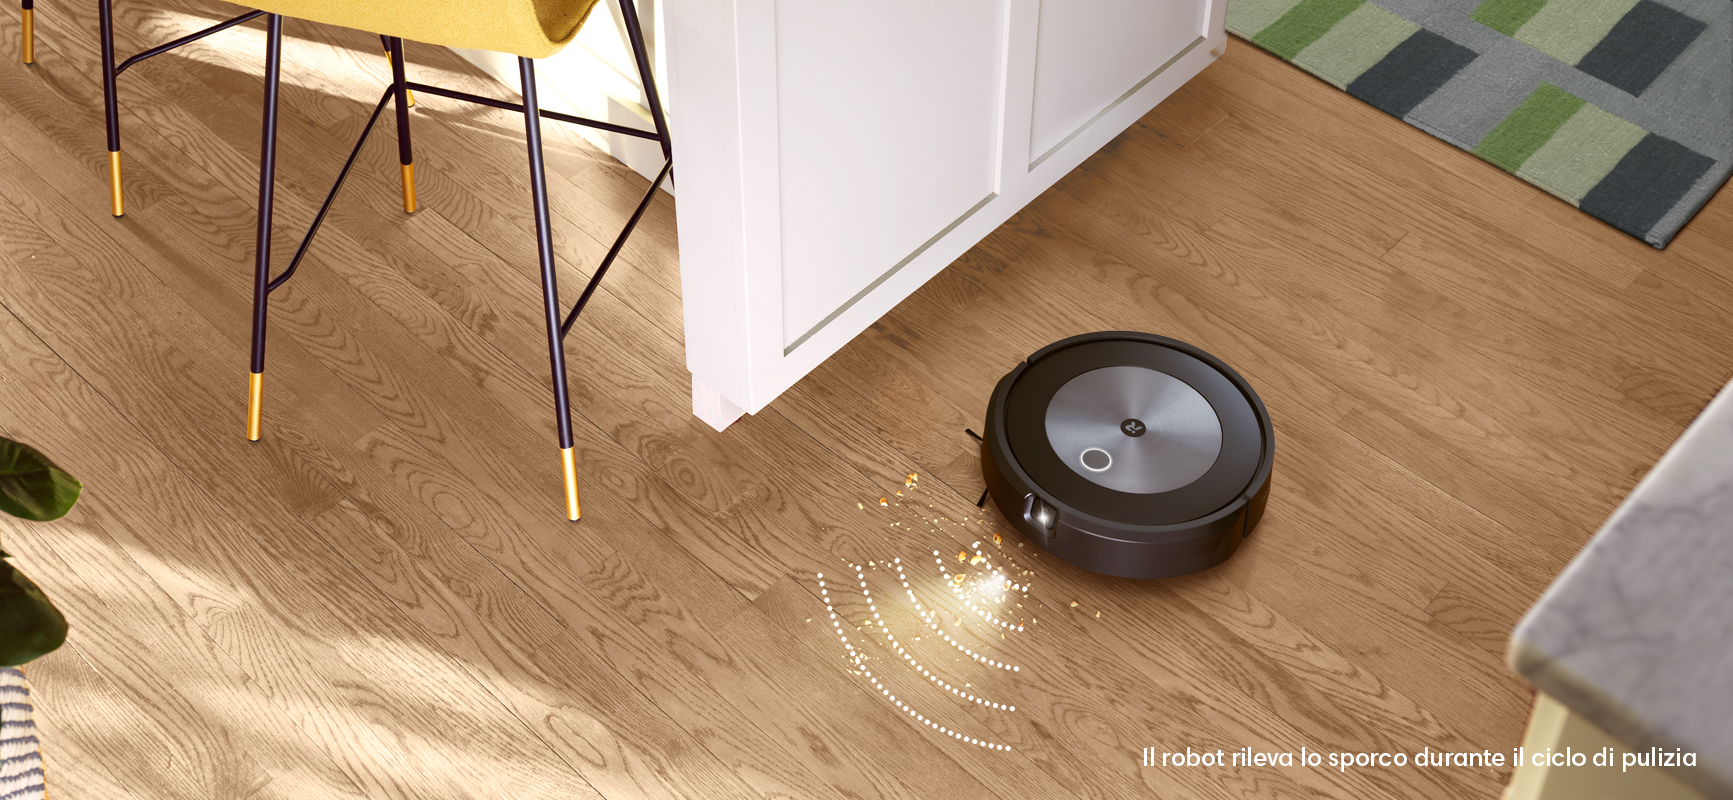 iRobot Roomba s9+ Wi-Fi Connected Robot Vacuum with Automatic Dirt Disposal